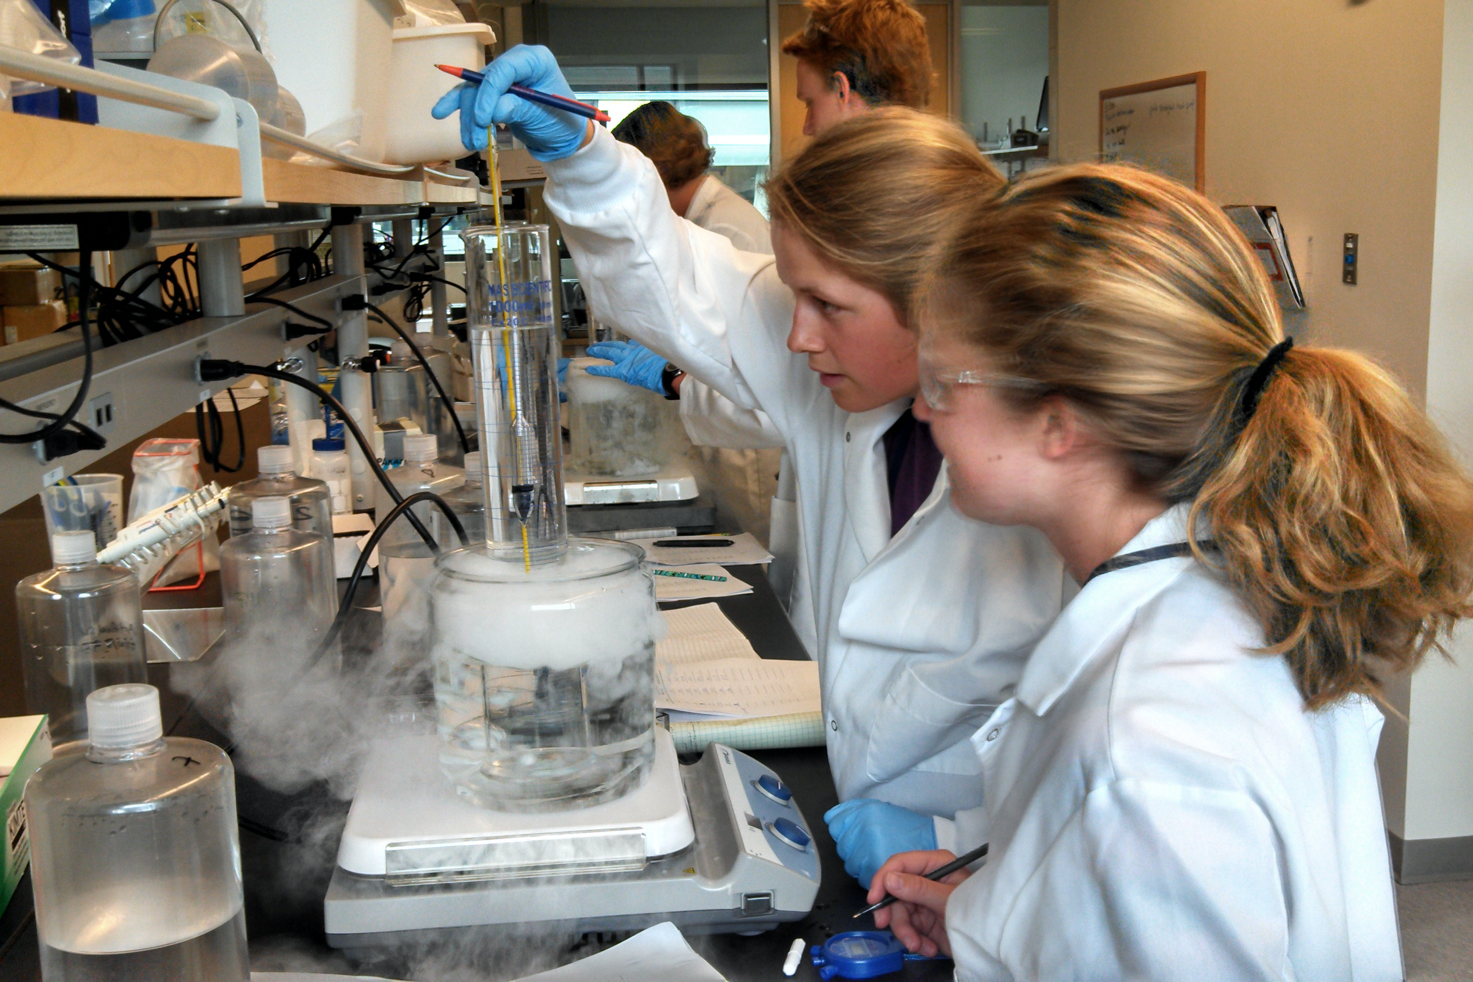 Students in lab performing an experiment.